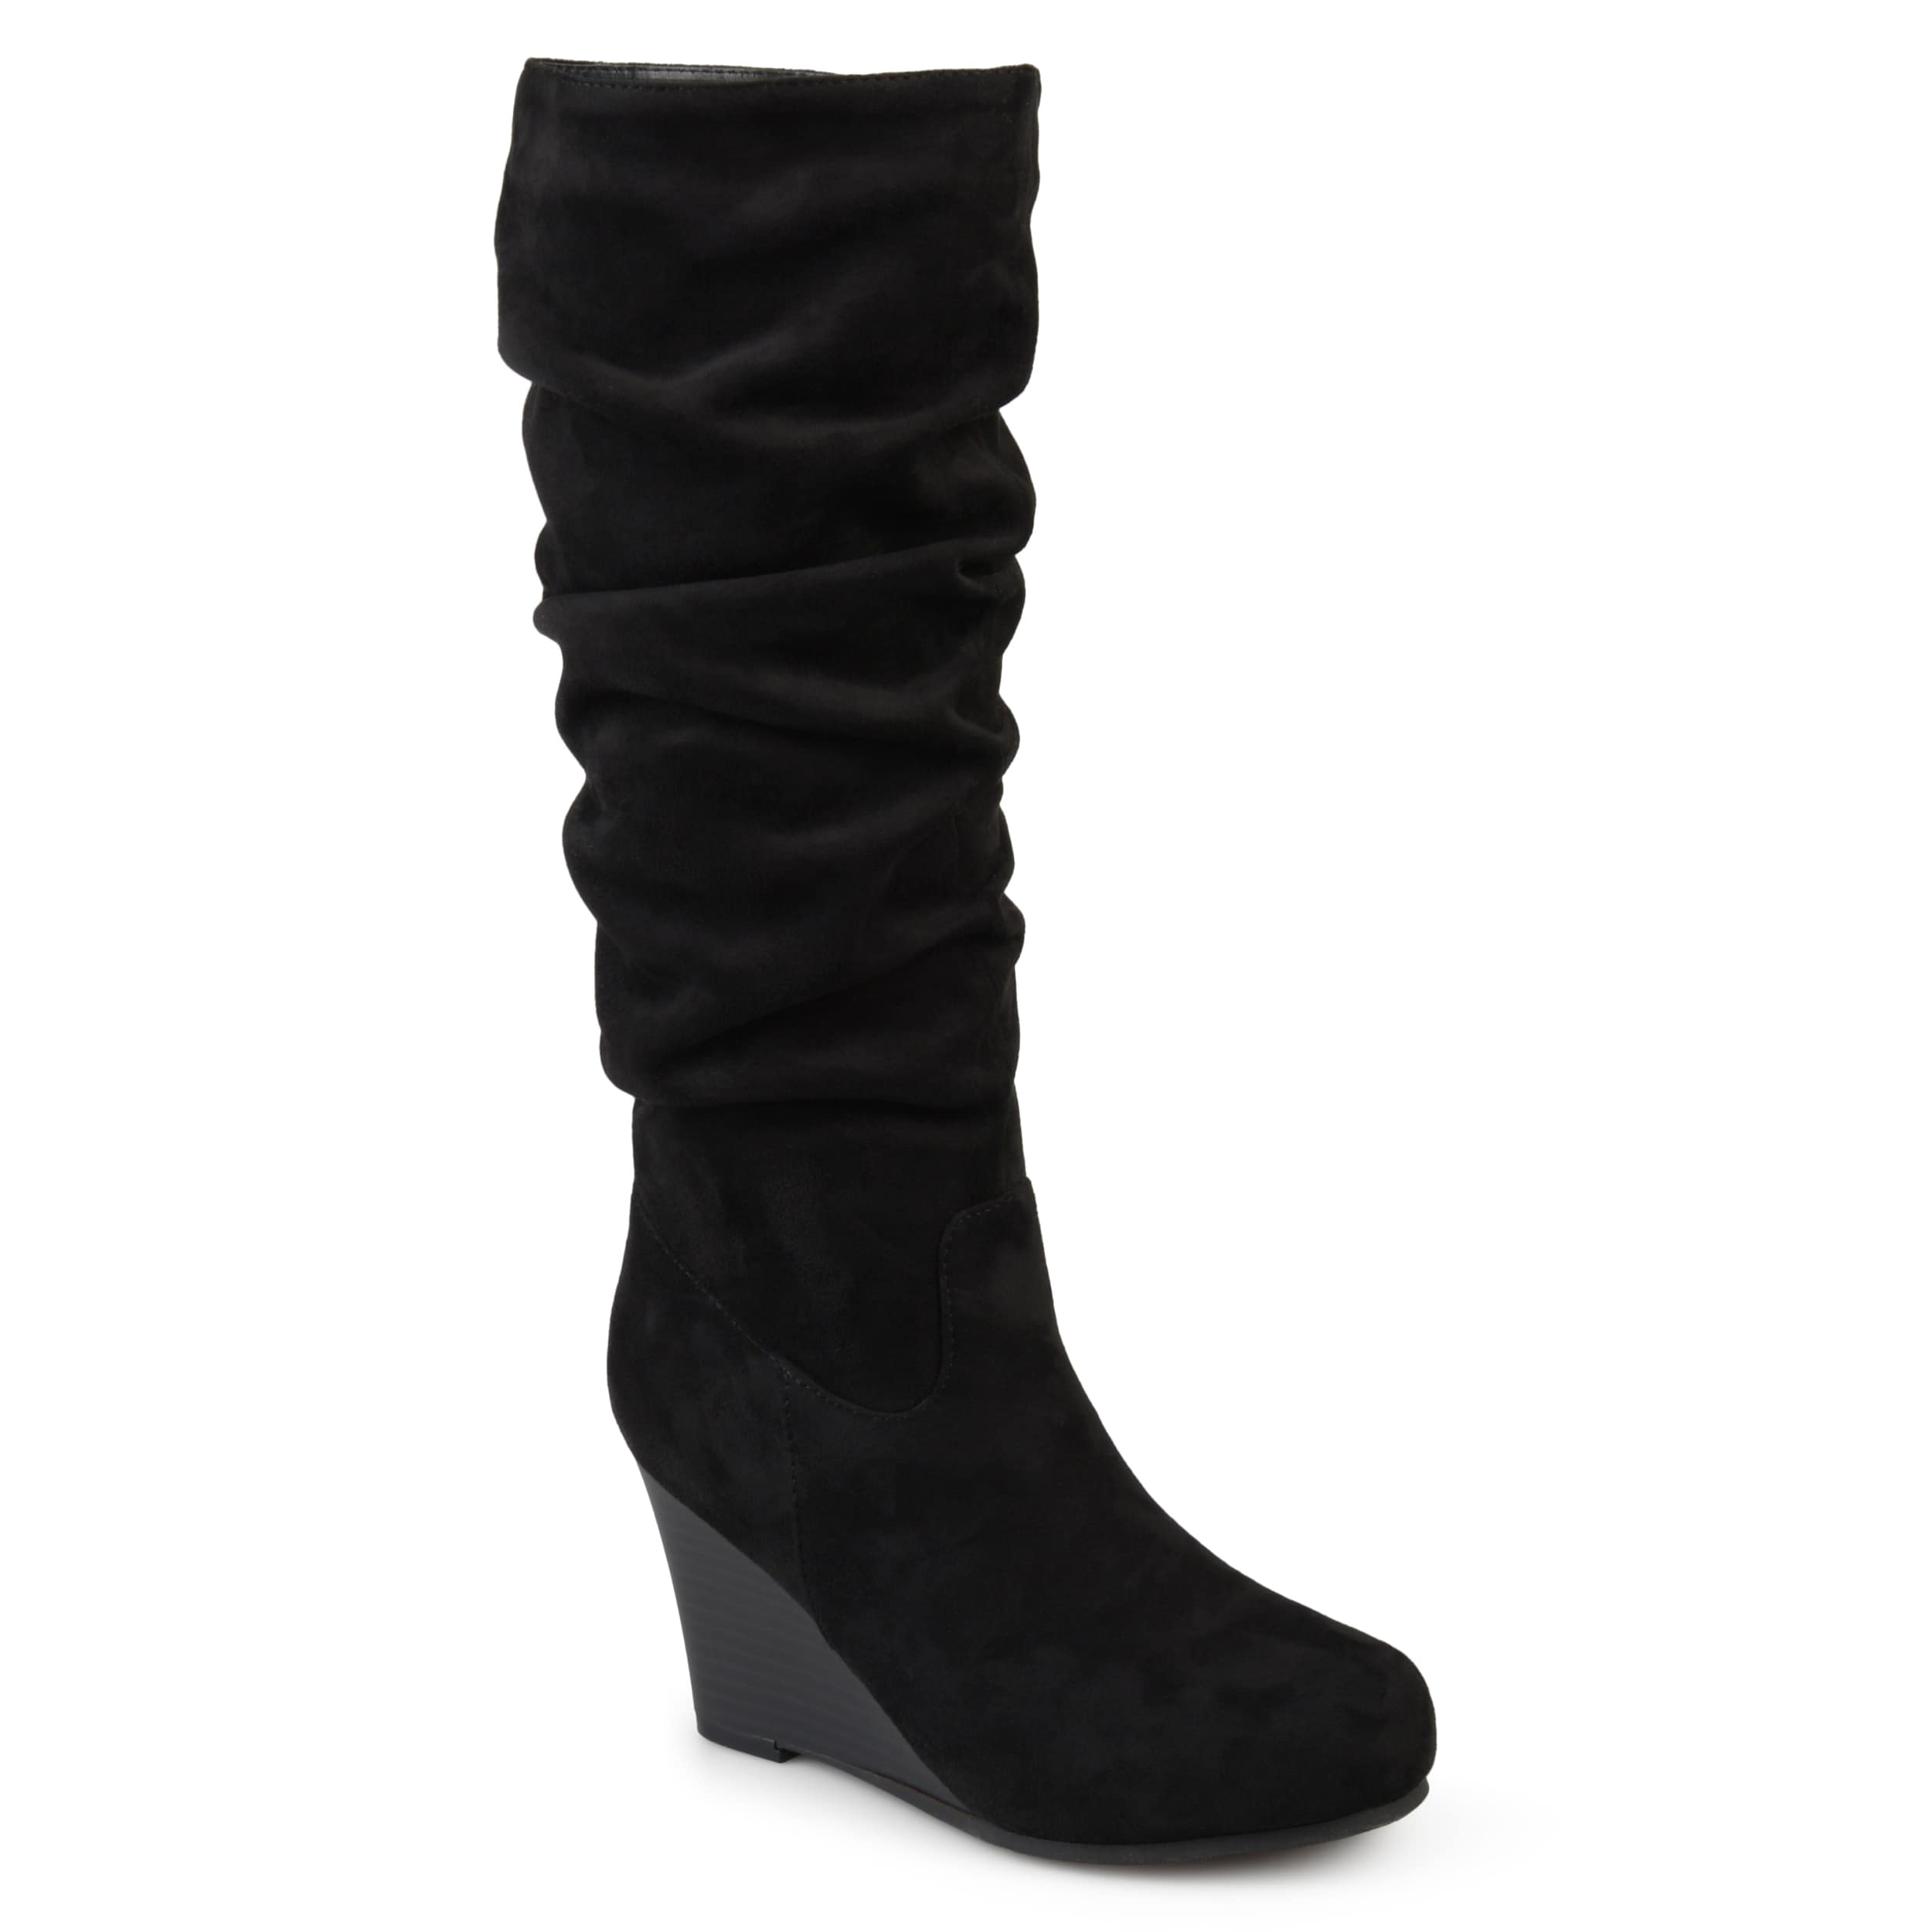 Wide Calf Slouchy Mid-calf Wedge Boots 